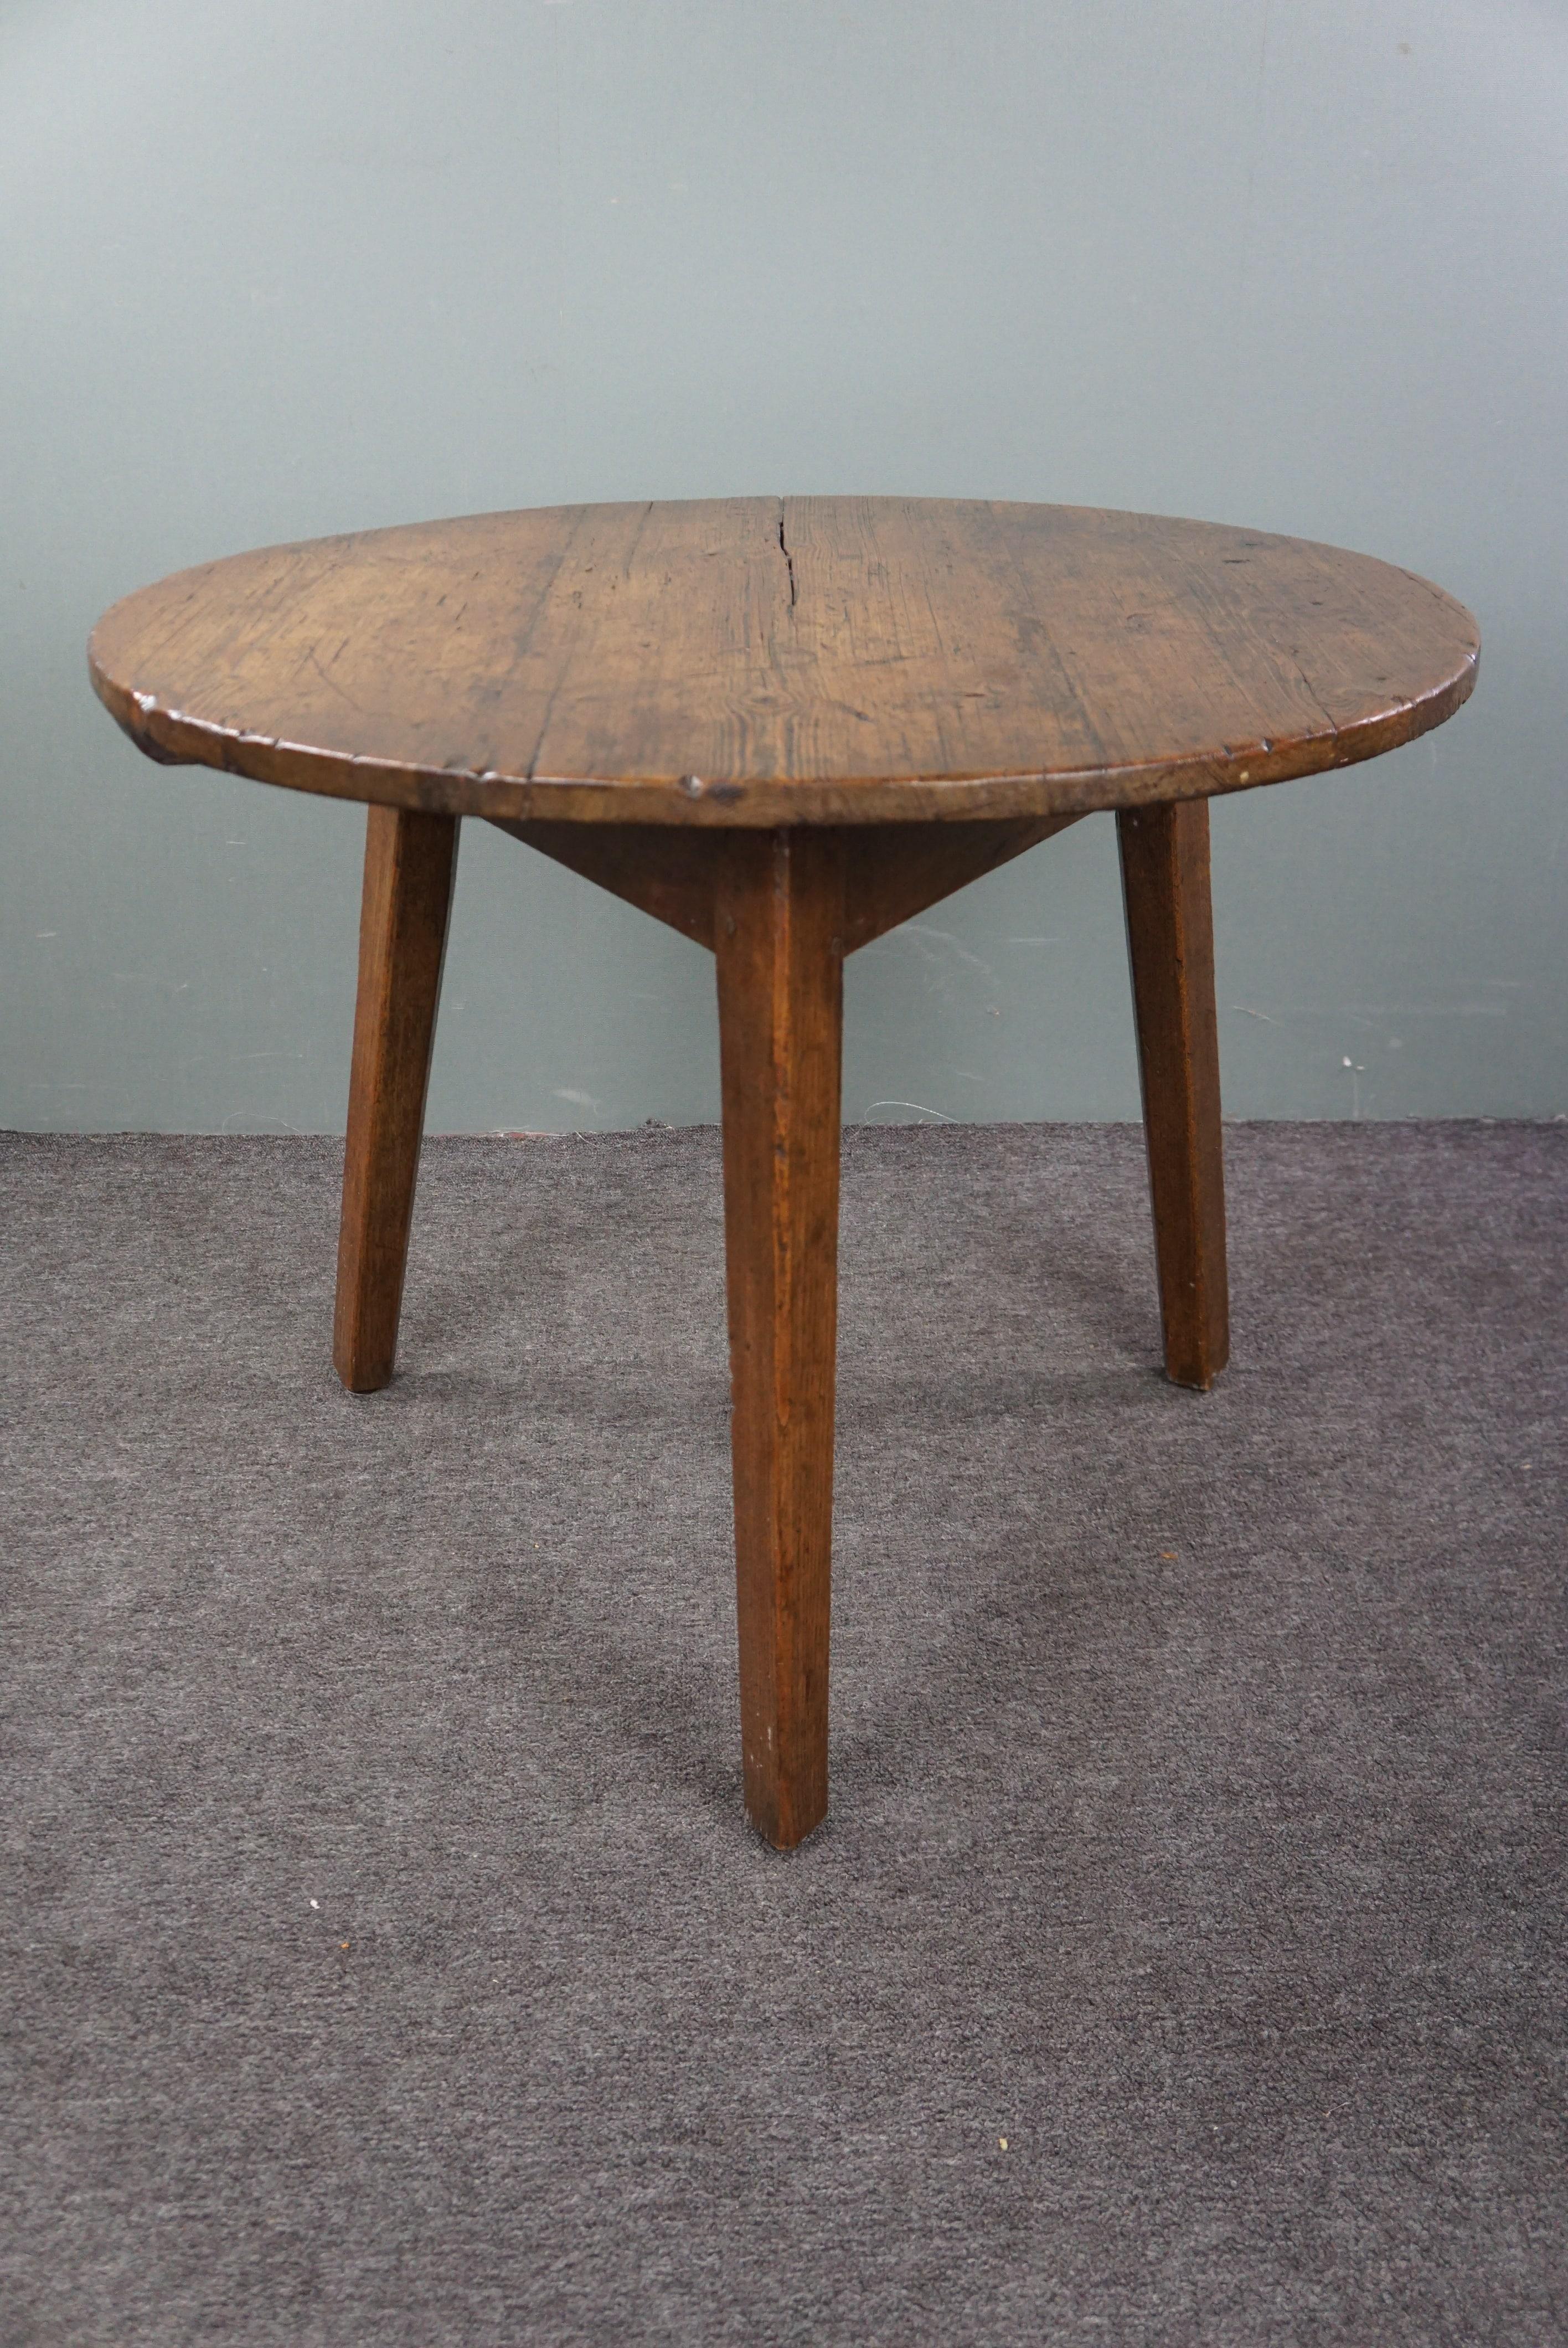 Offered is this beautiful English pinewood Cricket table from the 18th century. If you're a true enthusiast of beautifully styled interiors, you simply cannot overlook genuine antique English Cricket tables. The purity and class these tables exude